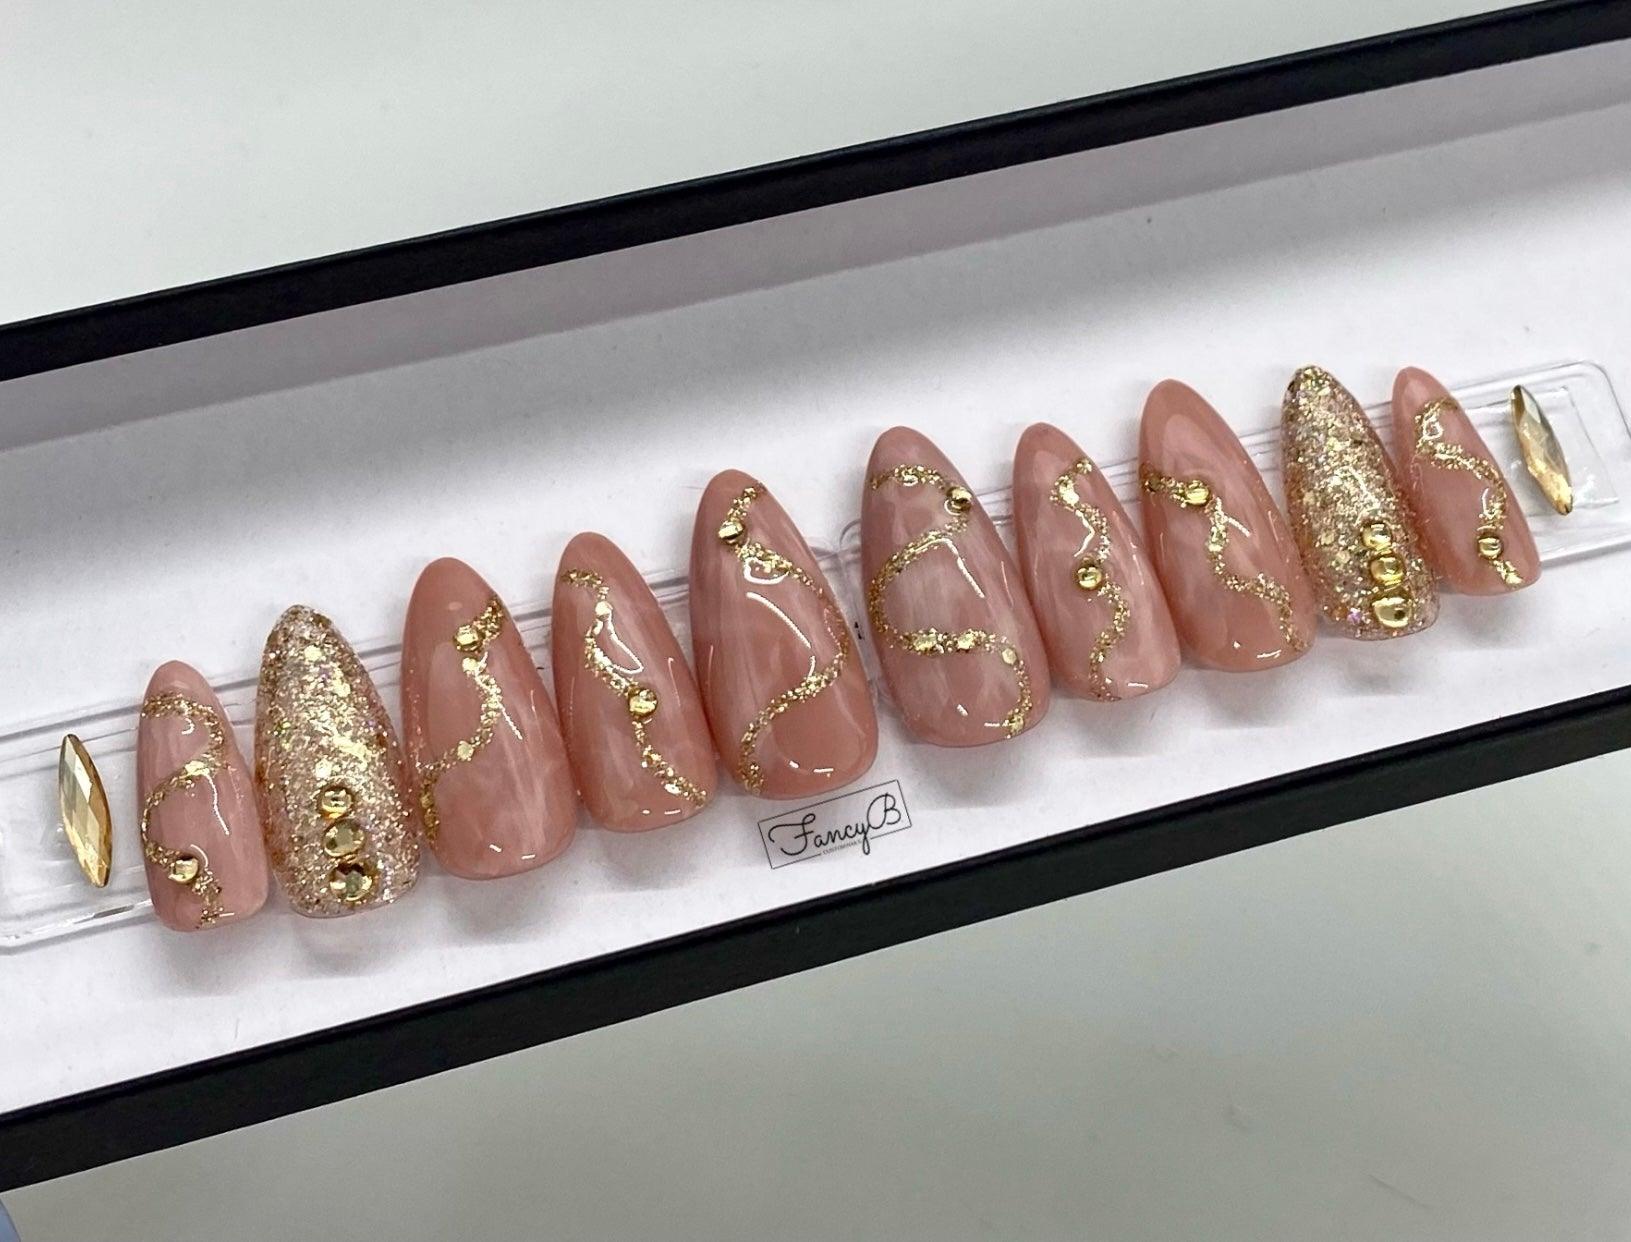 Custom nail design in a beautiful rose quartz design with gold glitter accents and gold gems all in a long almond shape.